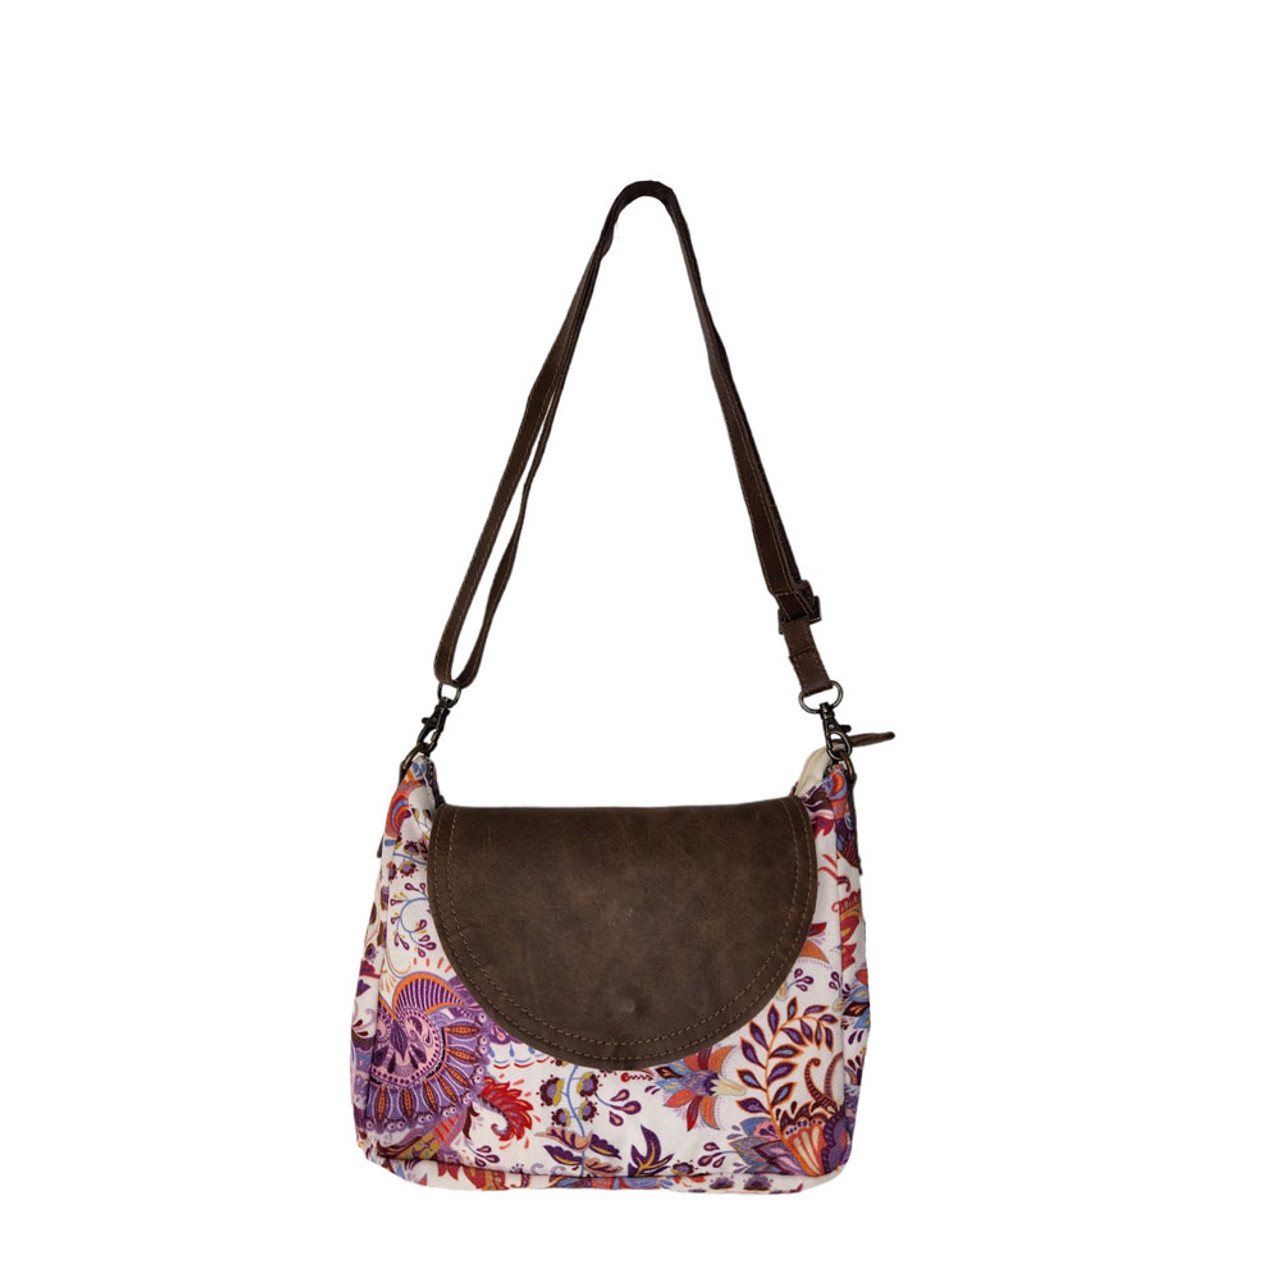 Laurel Burch leather hobo bag - clothing & accessories - by owner